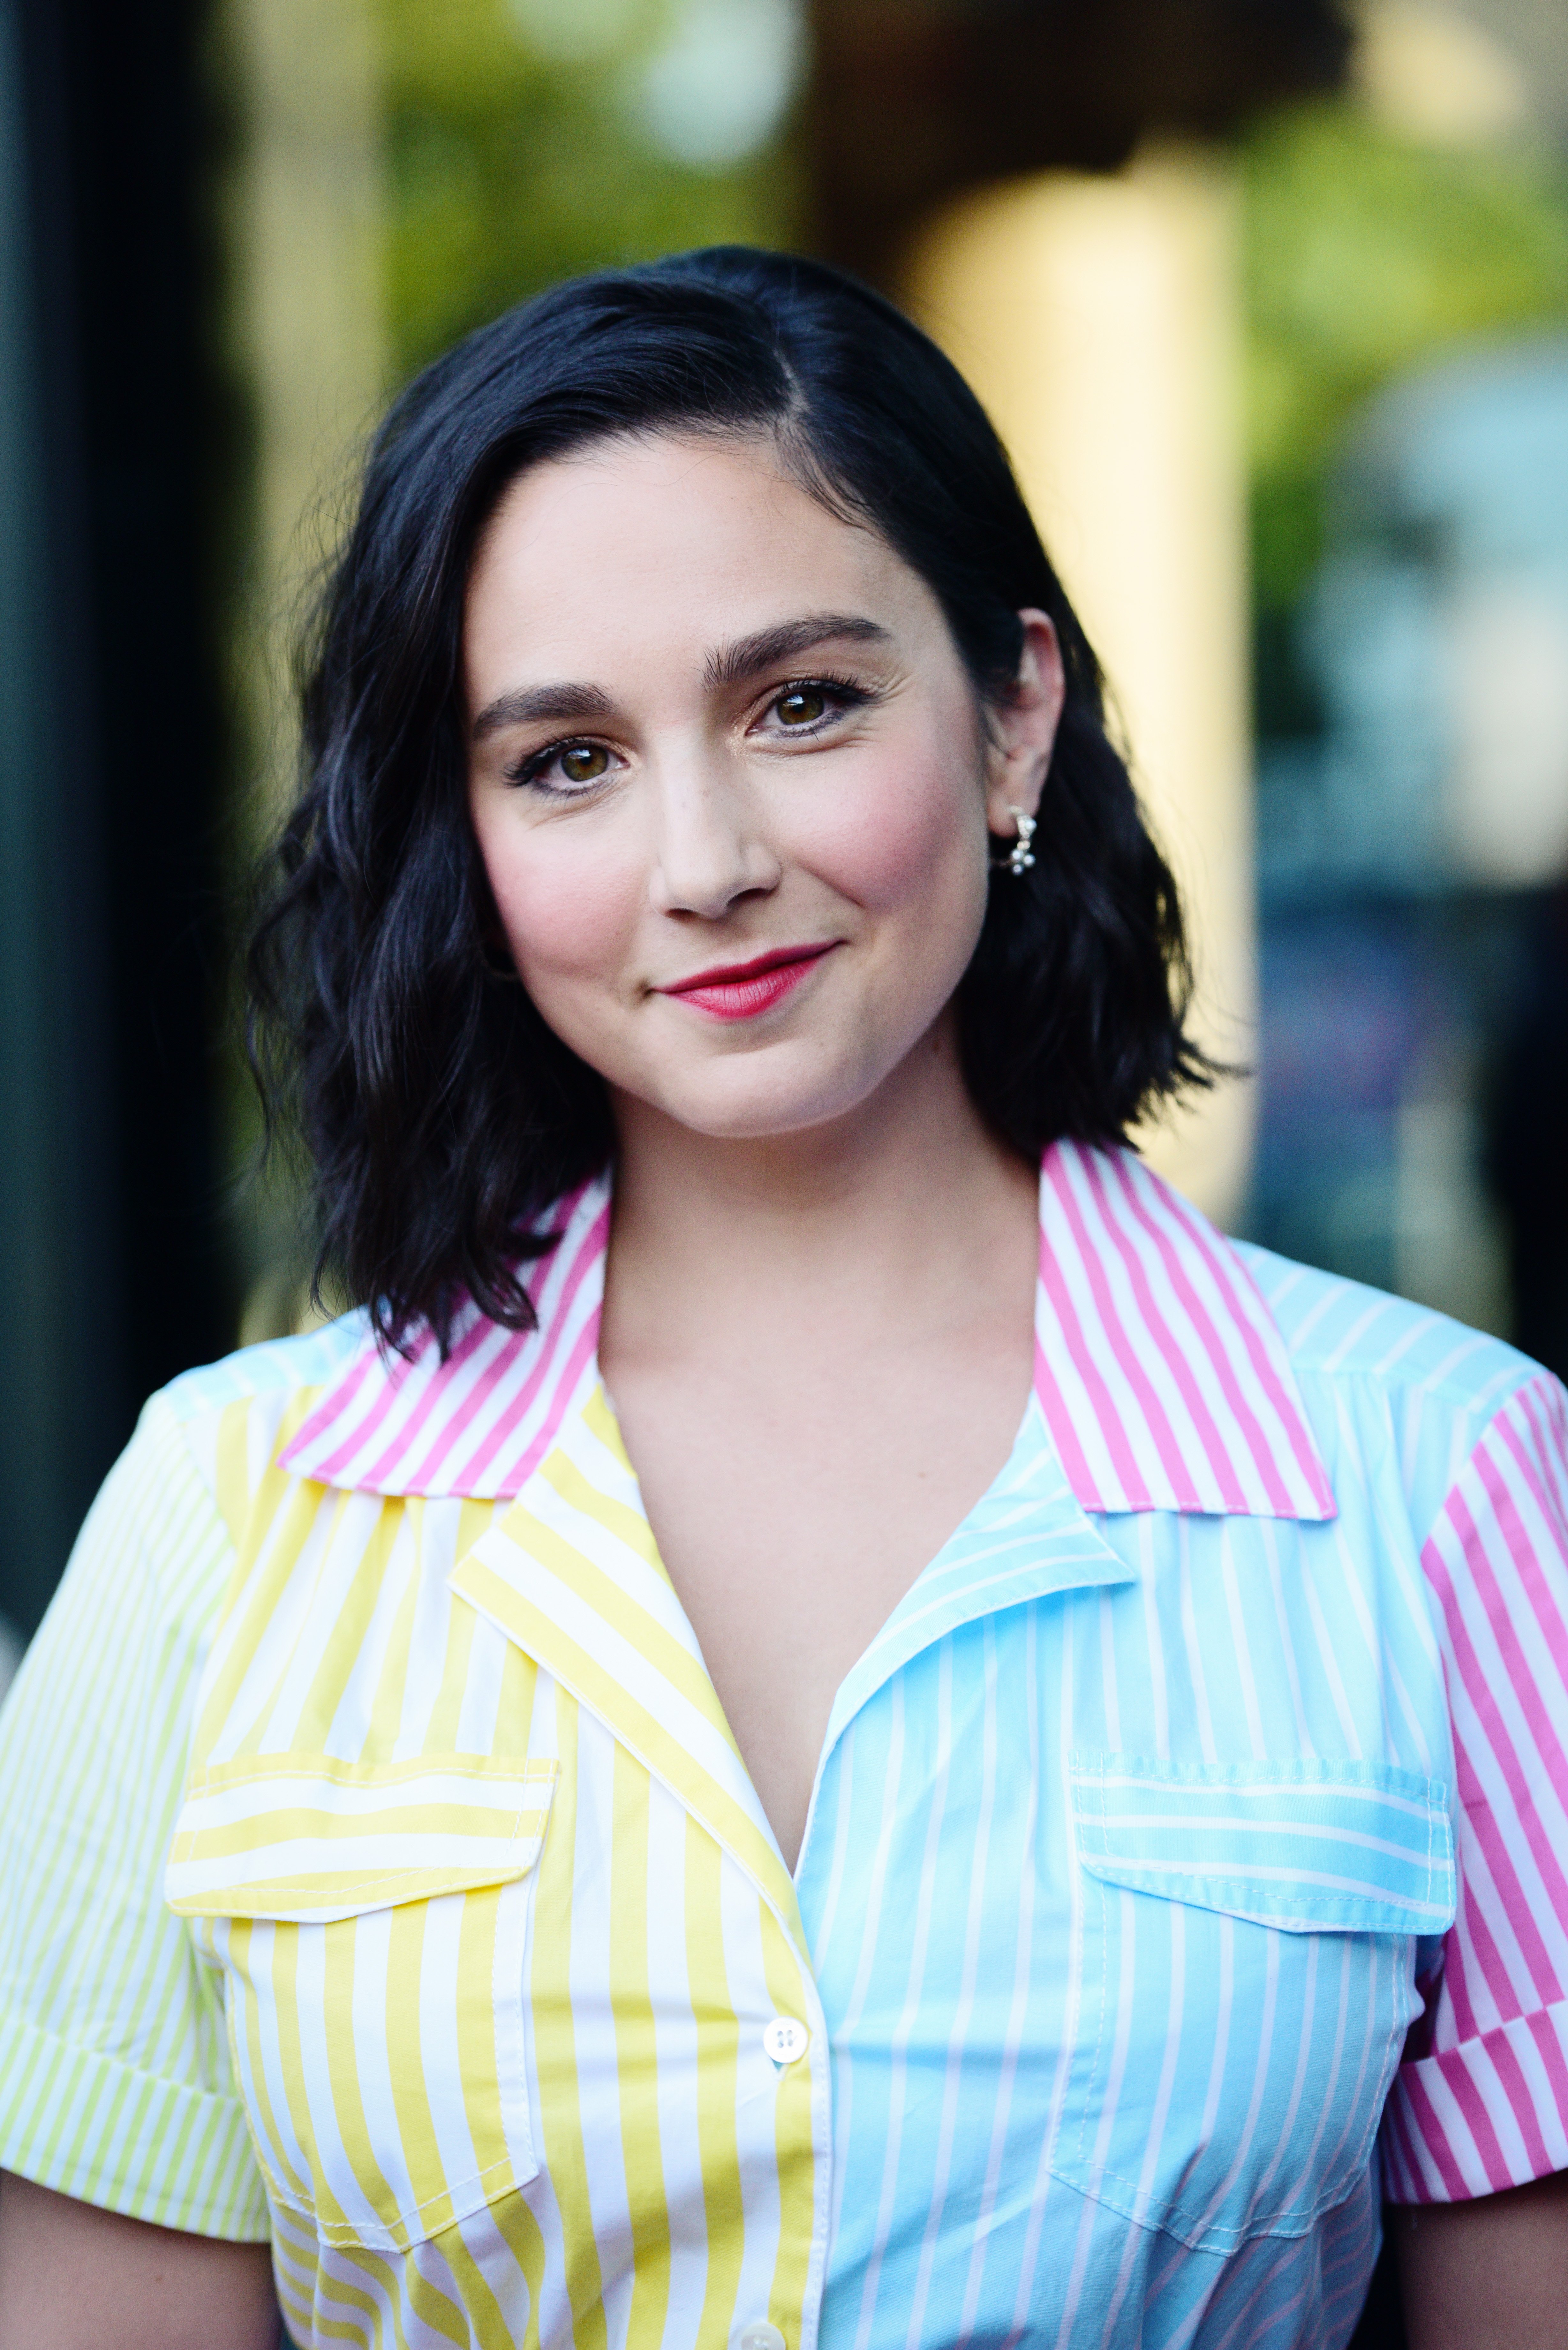 Molly Ephraim attends "A League Of Their Own" screening & panel discussion at Outfest at DGA Theater Complex on July 19, 2022, in Los Angeles, California. | Source: Getty Images